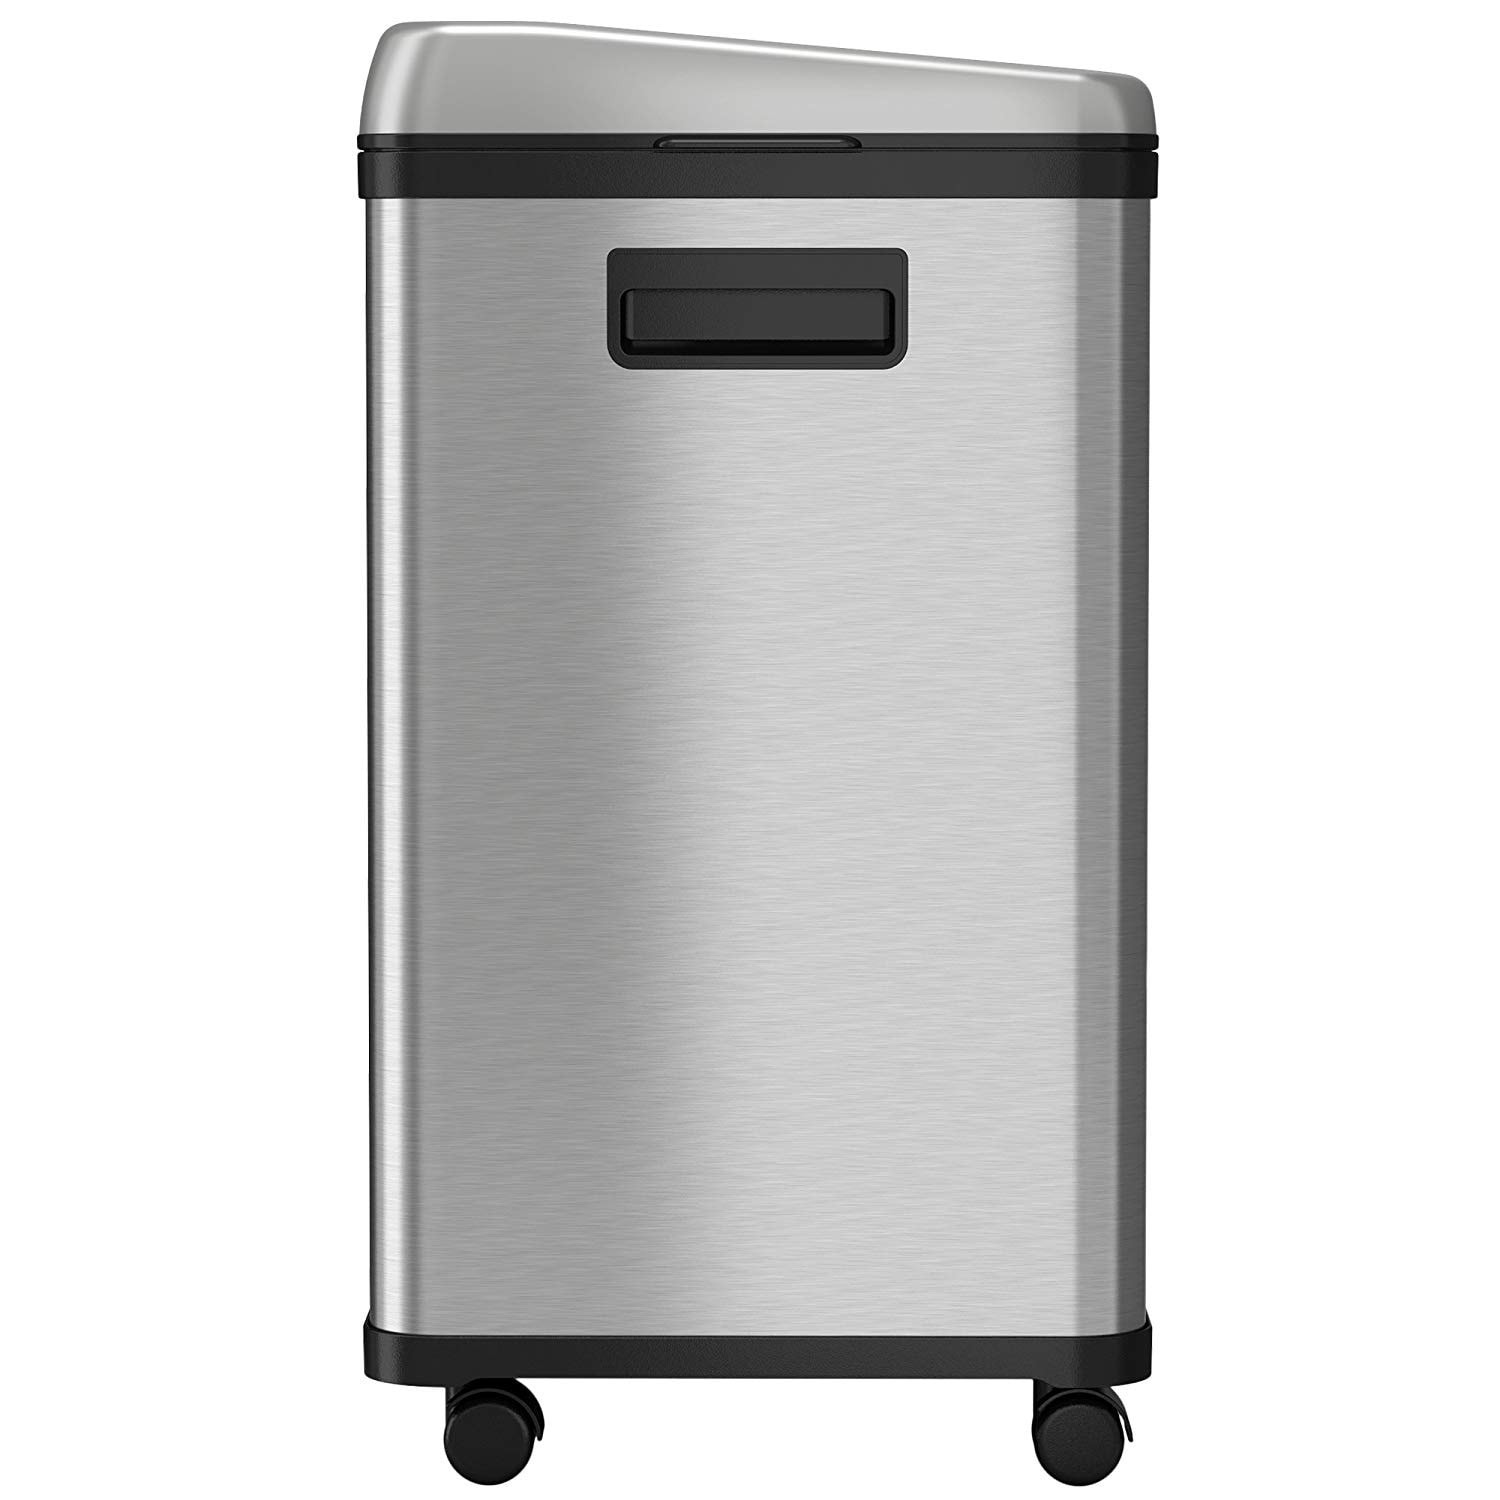 https://ak1.ostkcdn.com/images/products/4274128/iTouchless-Stainless-Steel-Trash-Can-Recycler-Automatic-Sensor-Touchless-Lid-Dual-Compartment-8-Gal-each-16-Gal-a6ecd677-0115-4244-9a90-619974caf211.jpg